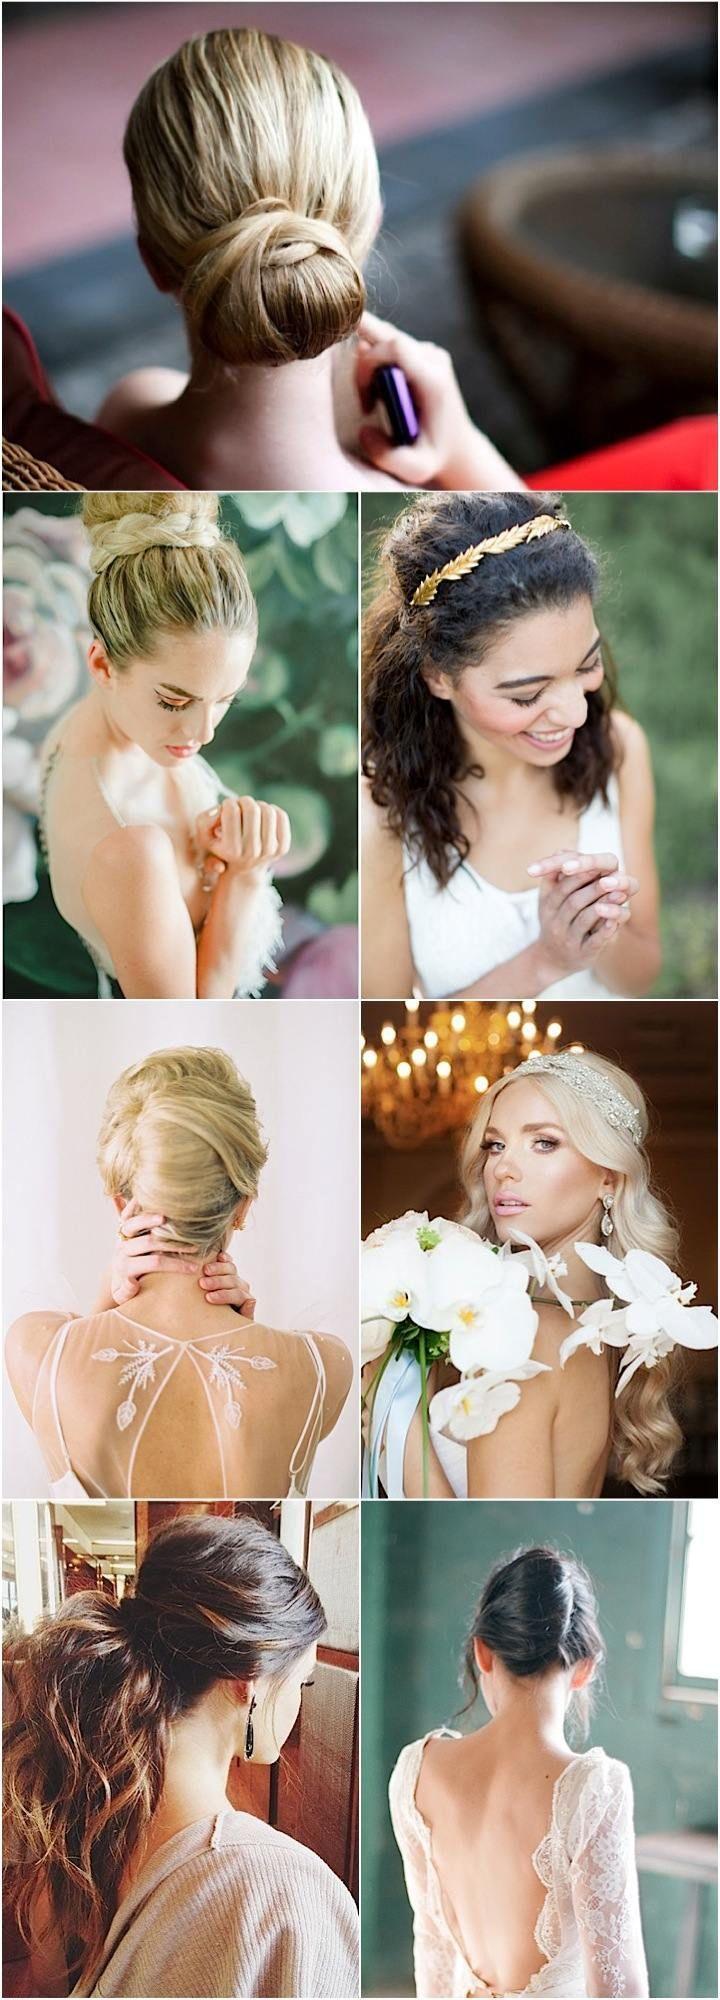 Wedding - Waves, Curls And Updos: Wedding Hairstyles For A Romantic Bridal Look